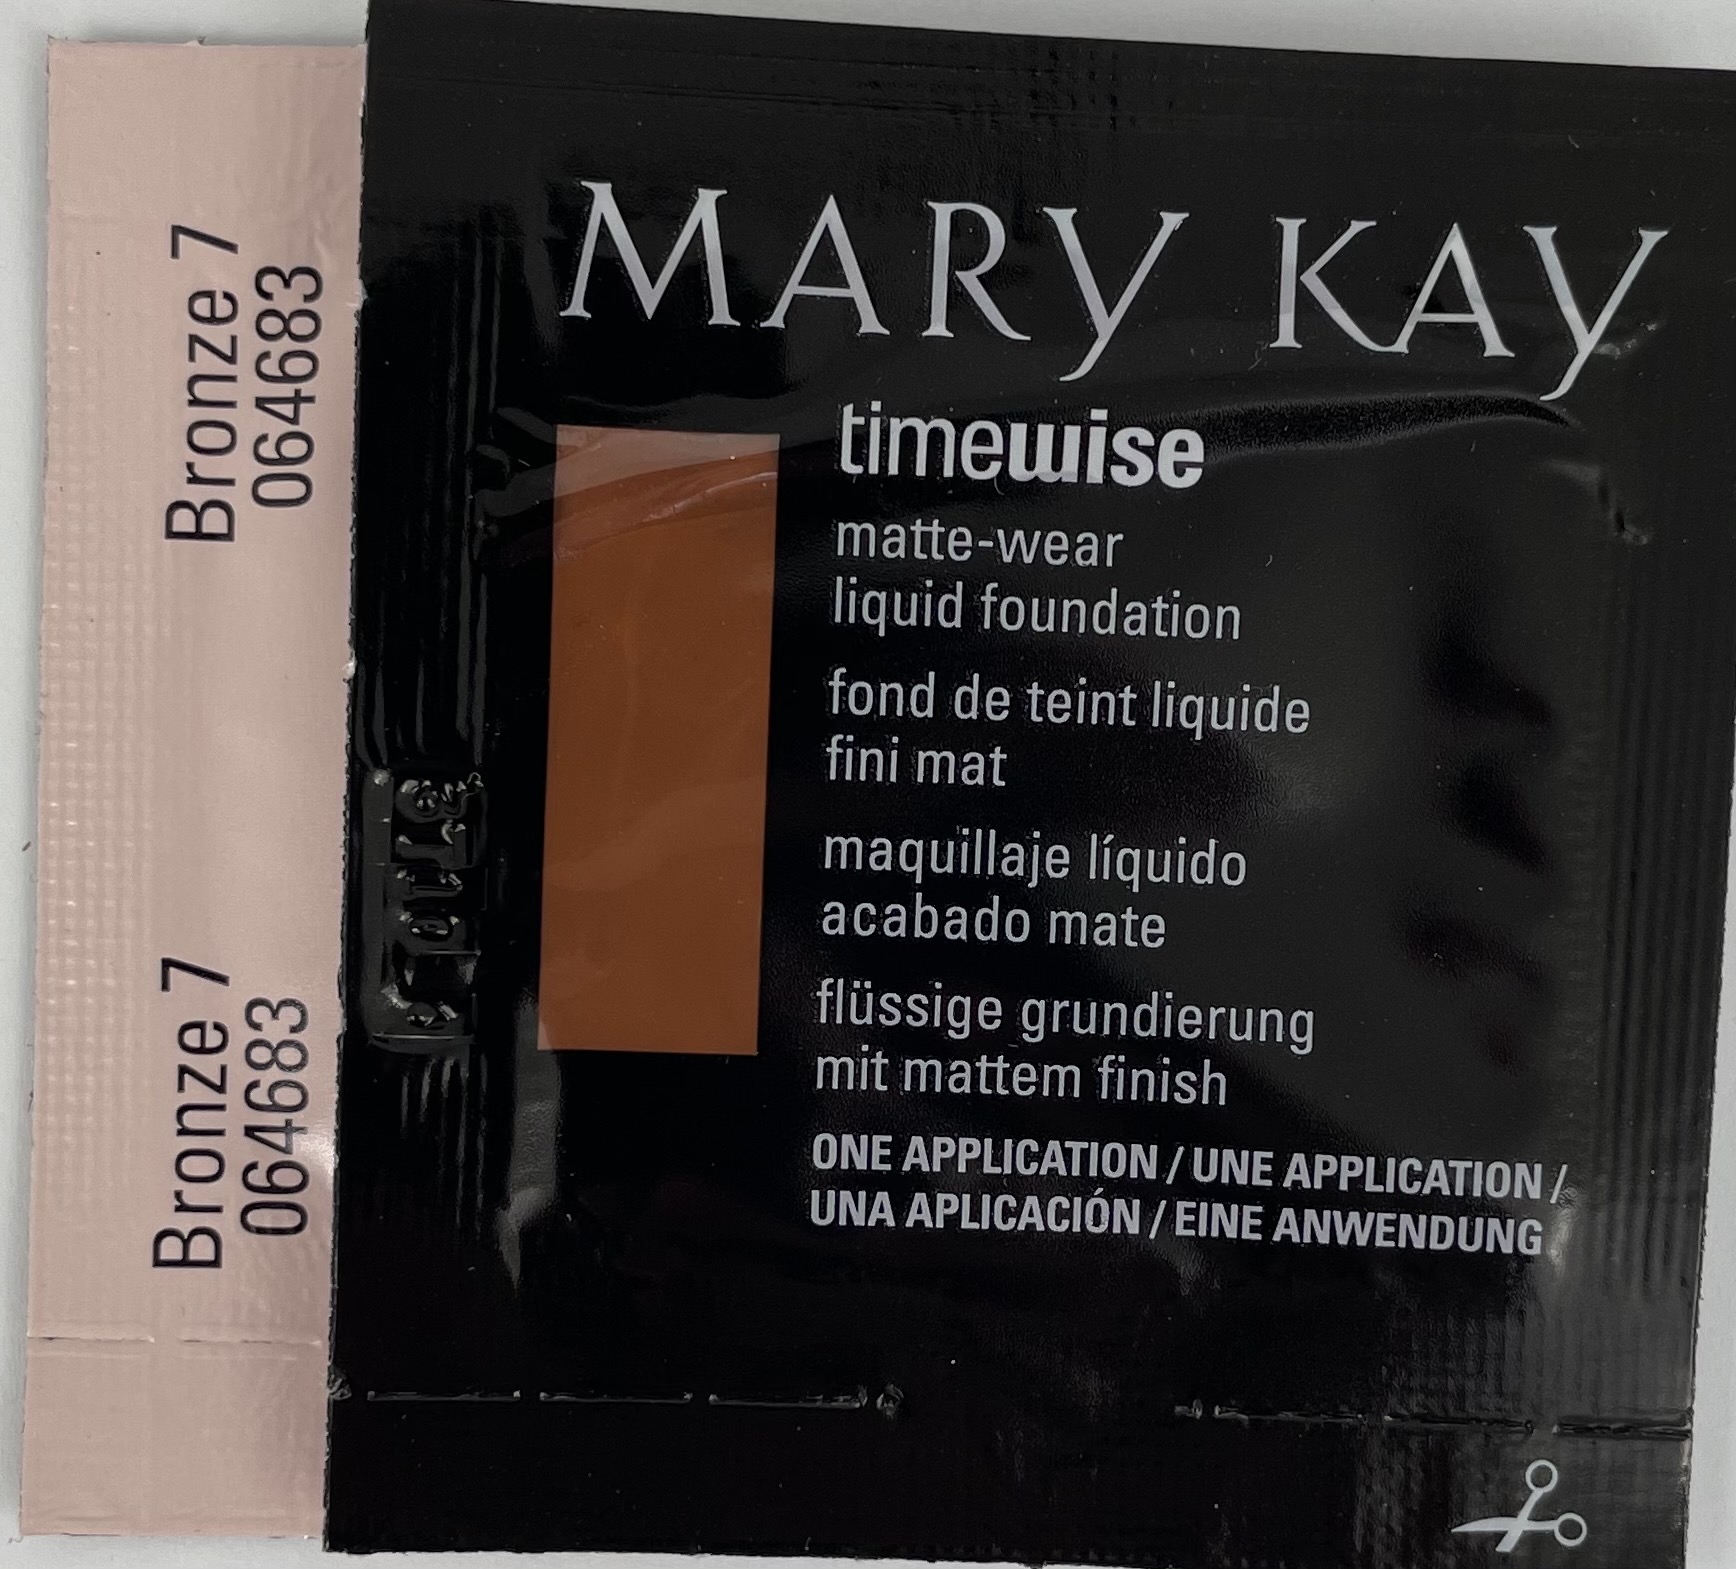 Størrelse fatning udledning Samples :: Mary Kay Bronze 7 Matte Timewise Foundation ~ Sample ( Discontinued) - Discount Mary Kay Cosmetics